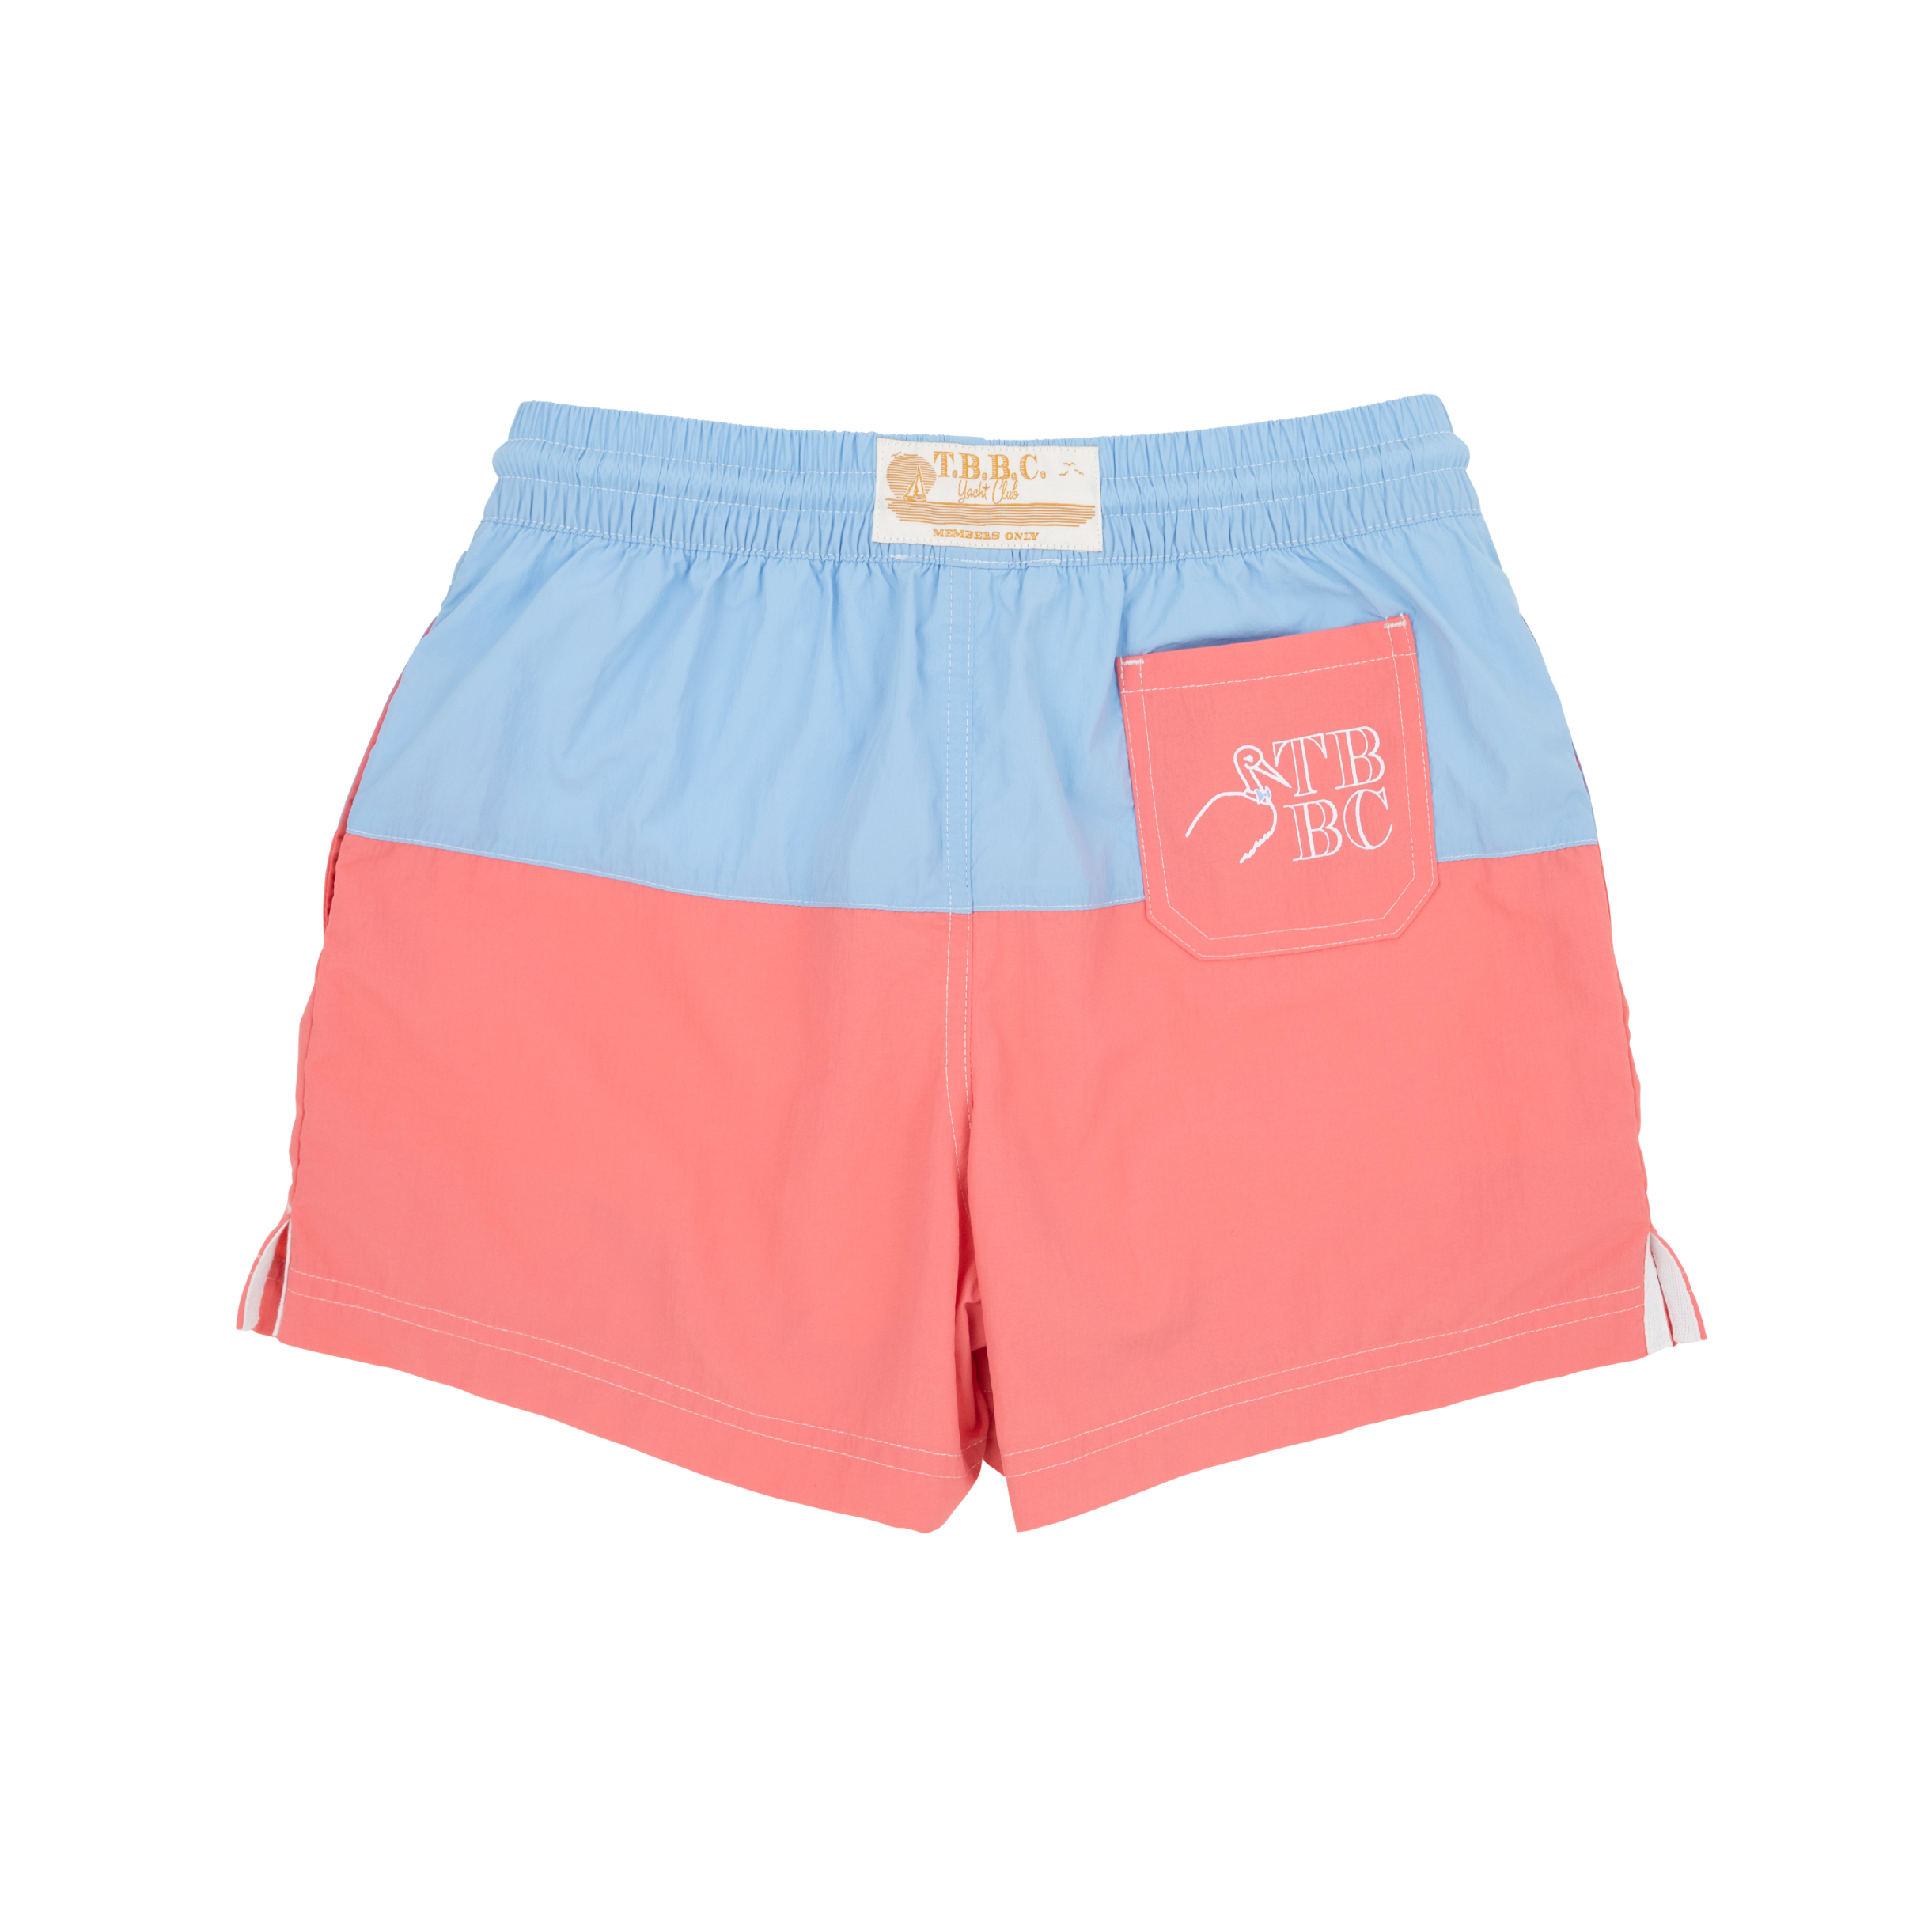 The Beaufort Bonnet Company - Country Club Colorblock Trunk - Beale Street Blue/Parrot Cay Coral